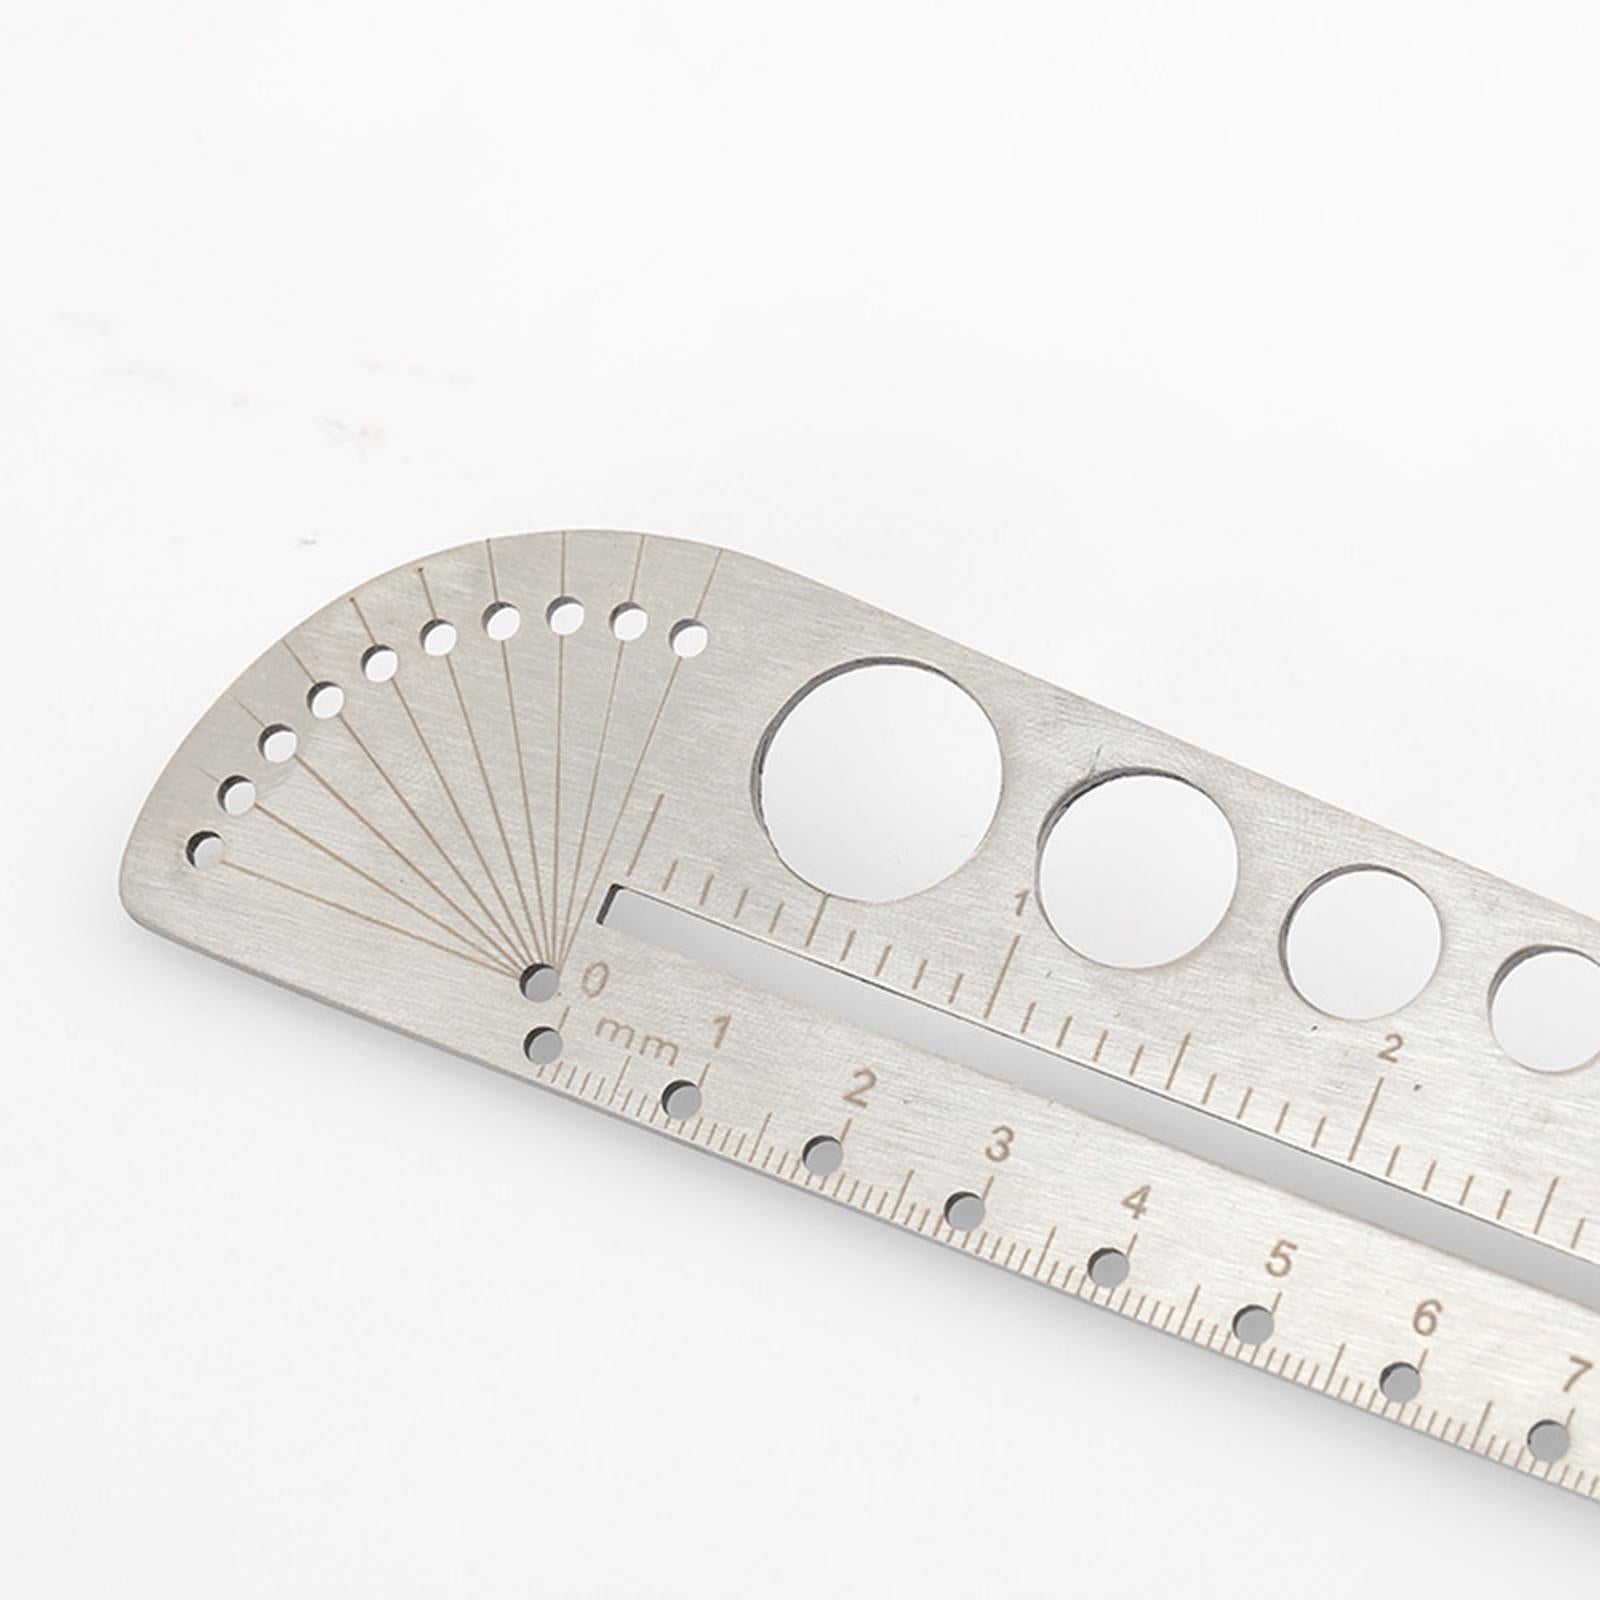 Multifunctional Angle Protractor Ruler Clear Scale for School Engineers